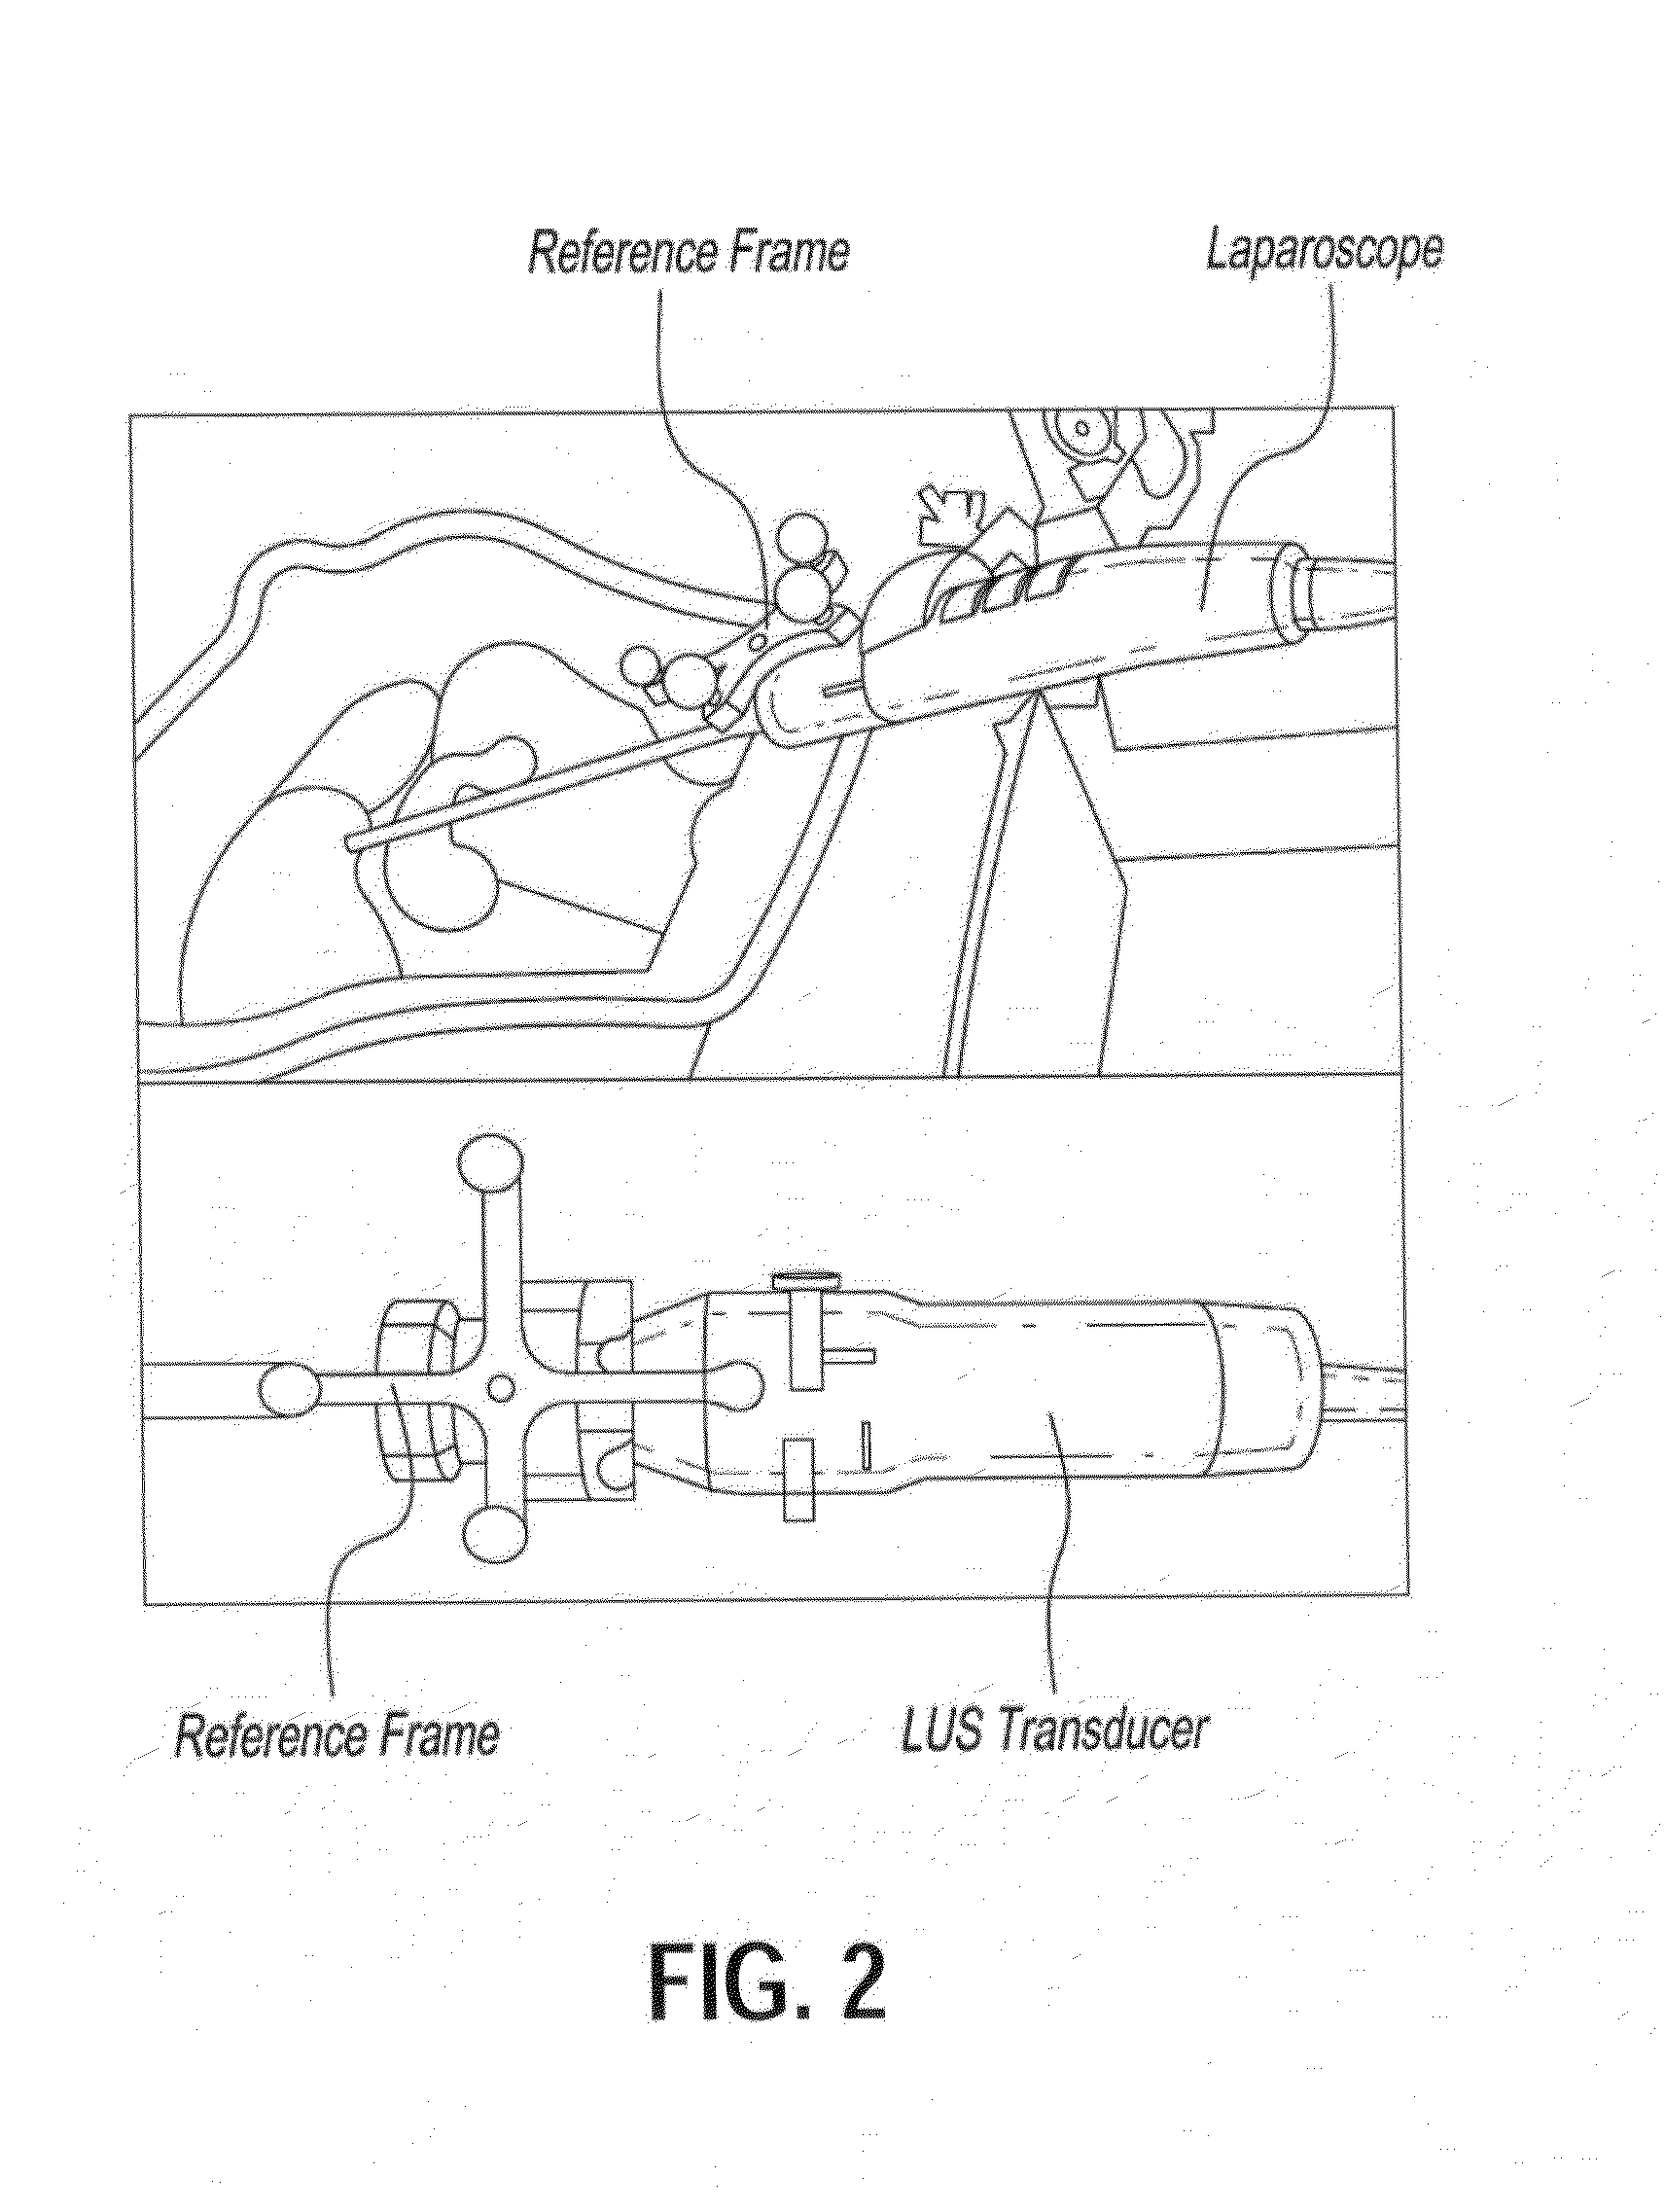 Device and method for generating composite images for endoscopic surgery of moving and deformable anatomy